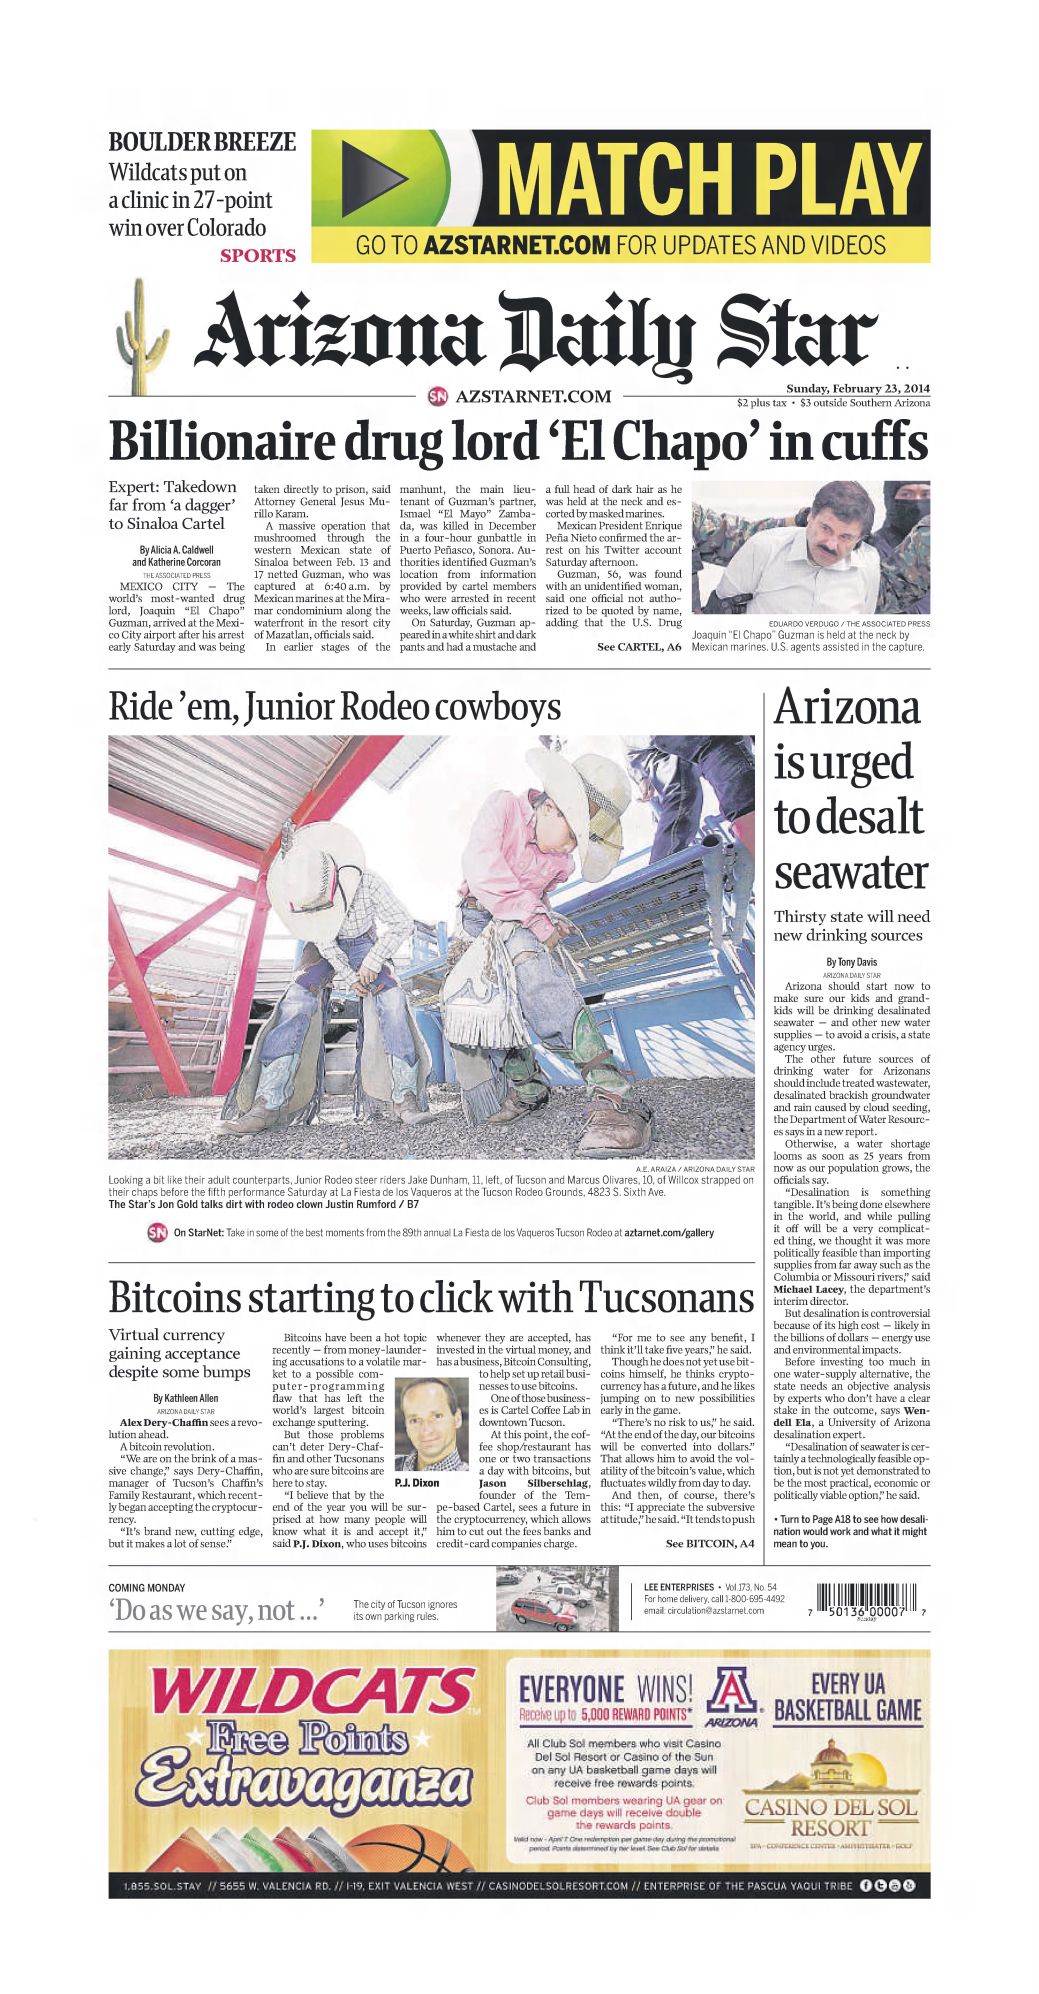 Historical Feb. 23 Arizona Daily Star front pages Tucson history and